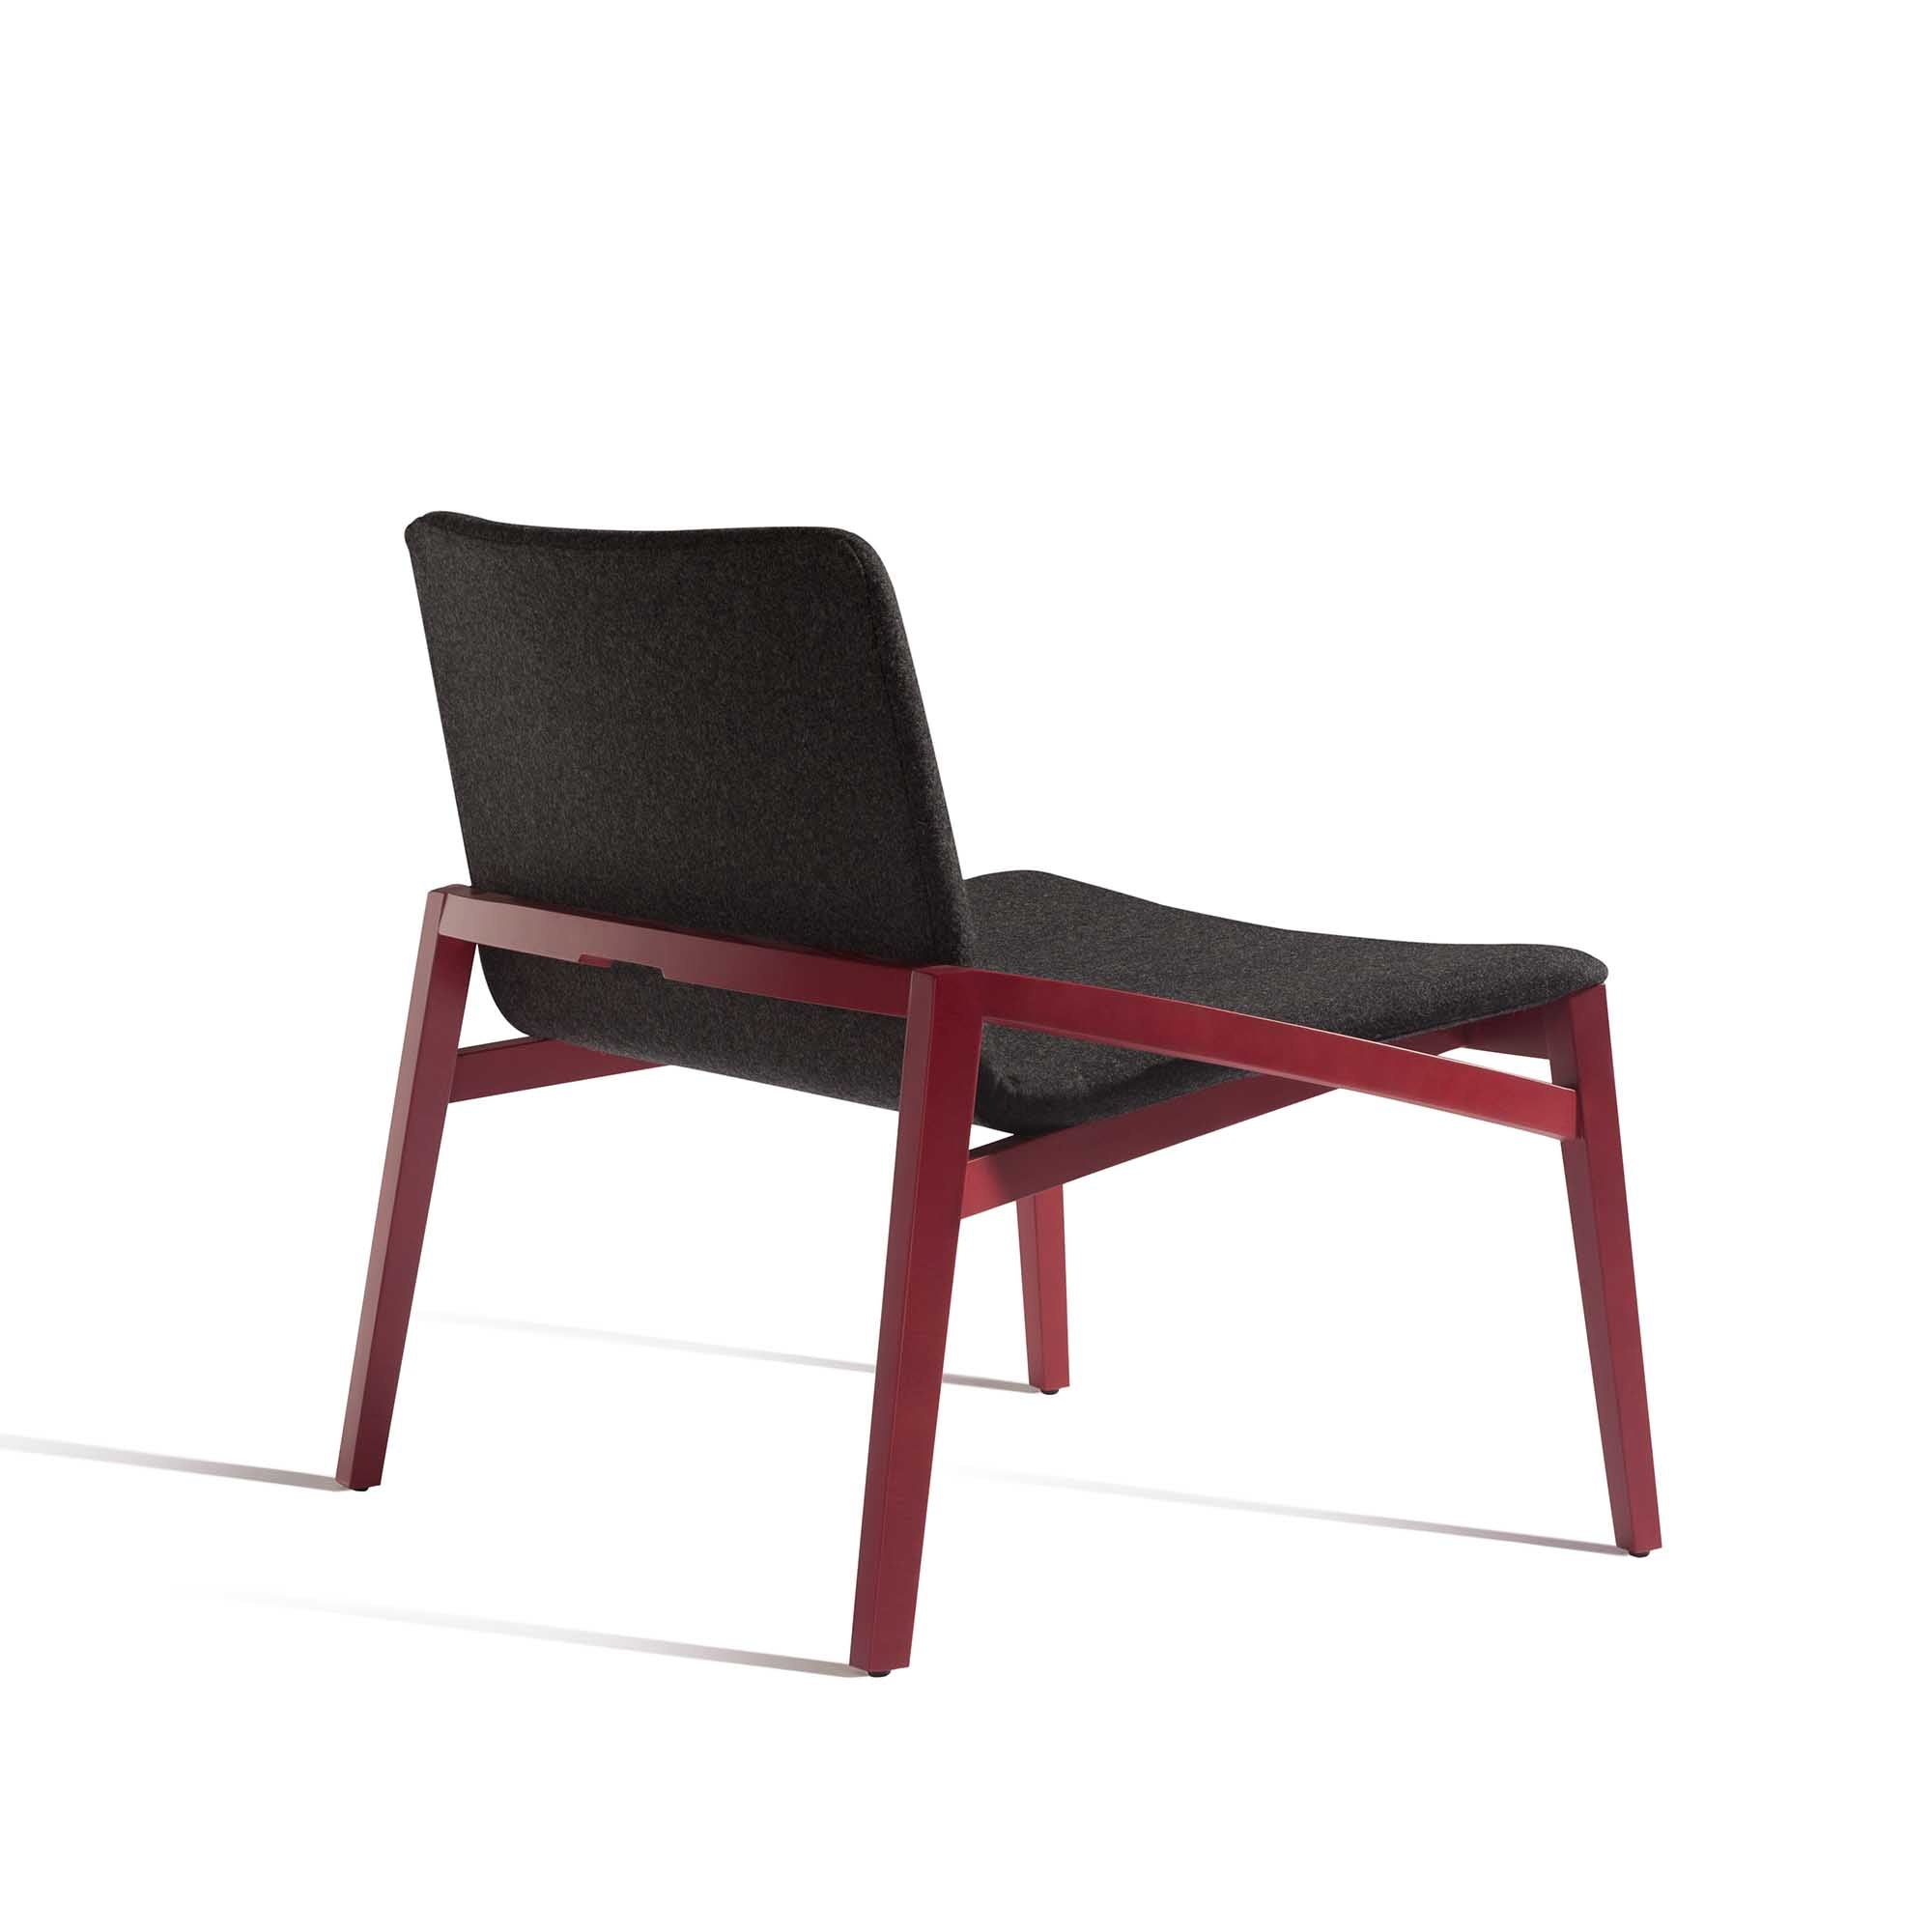 CAPITA Lounge Chair solid red beech wooden base, half-back view